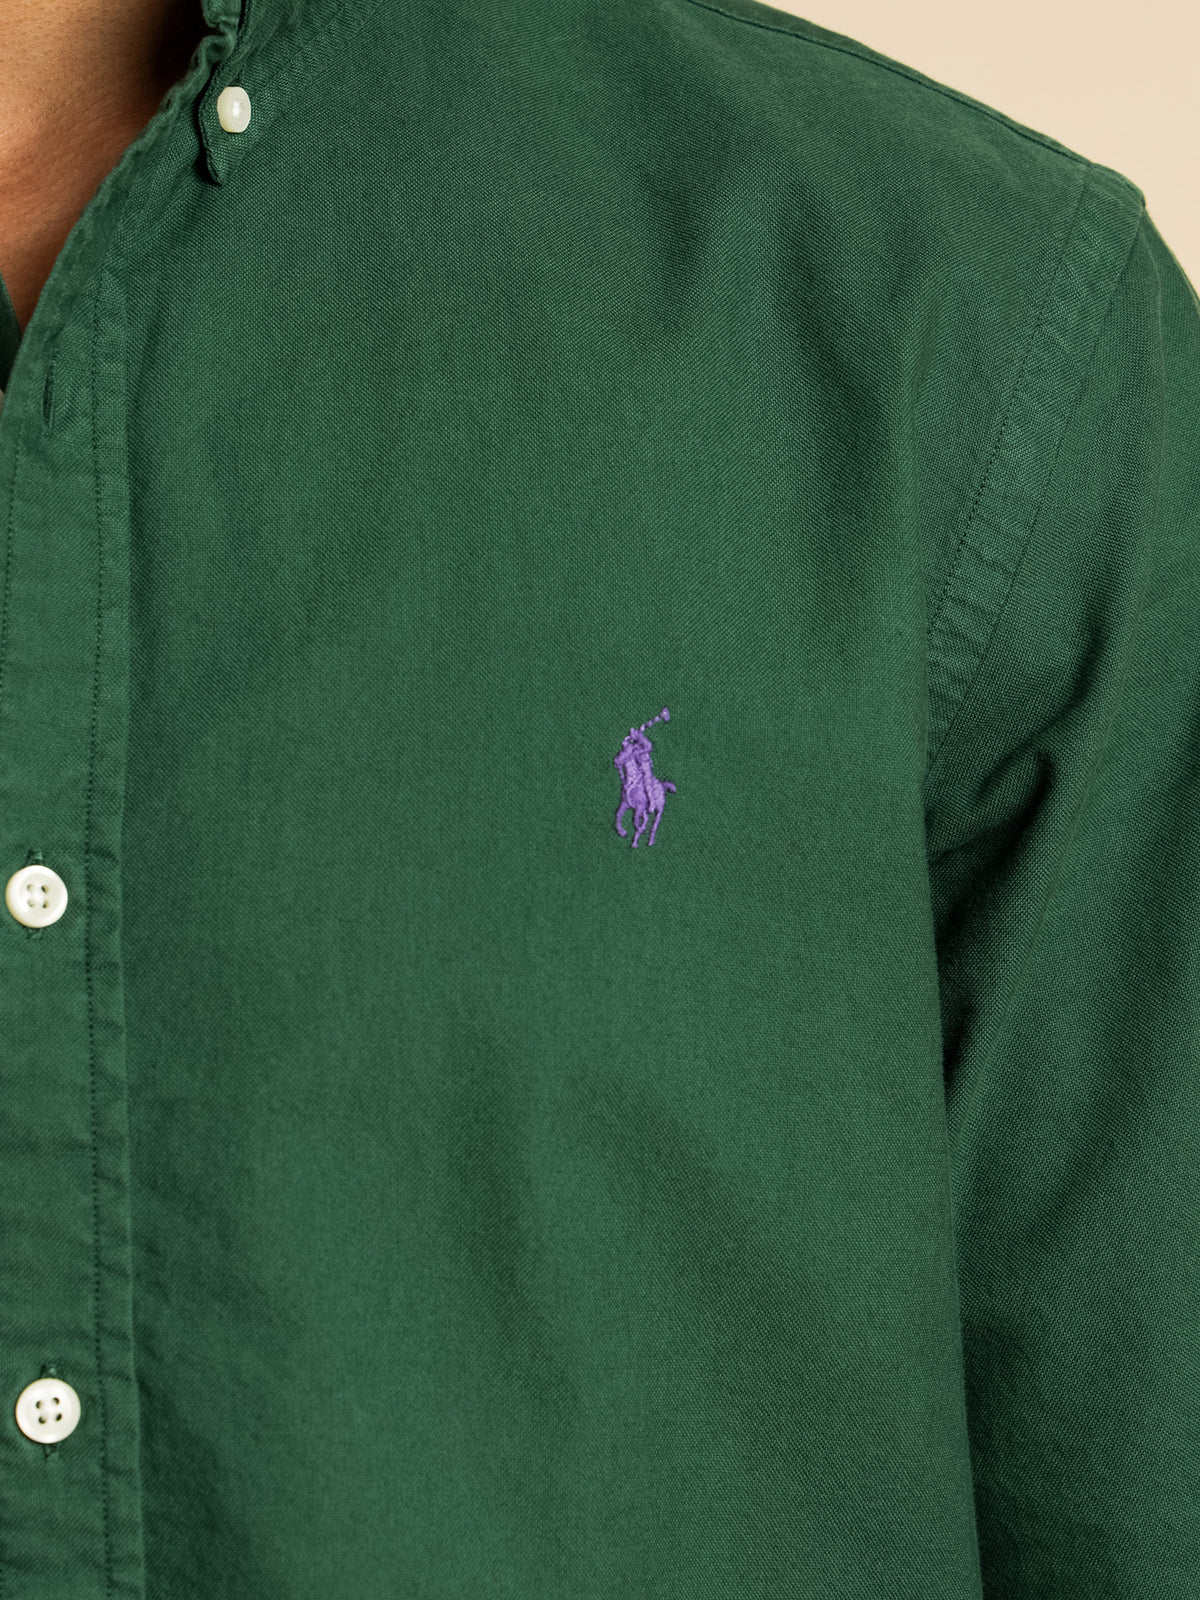 Slim Fit Button Up Shirt in Bottle Green